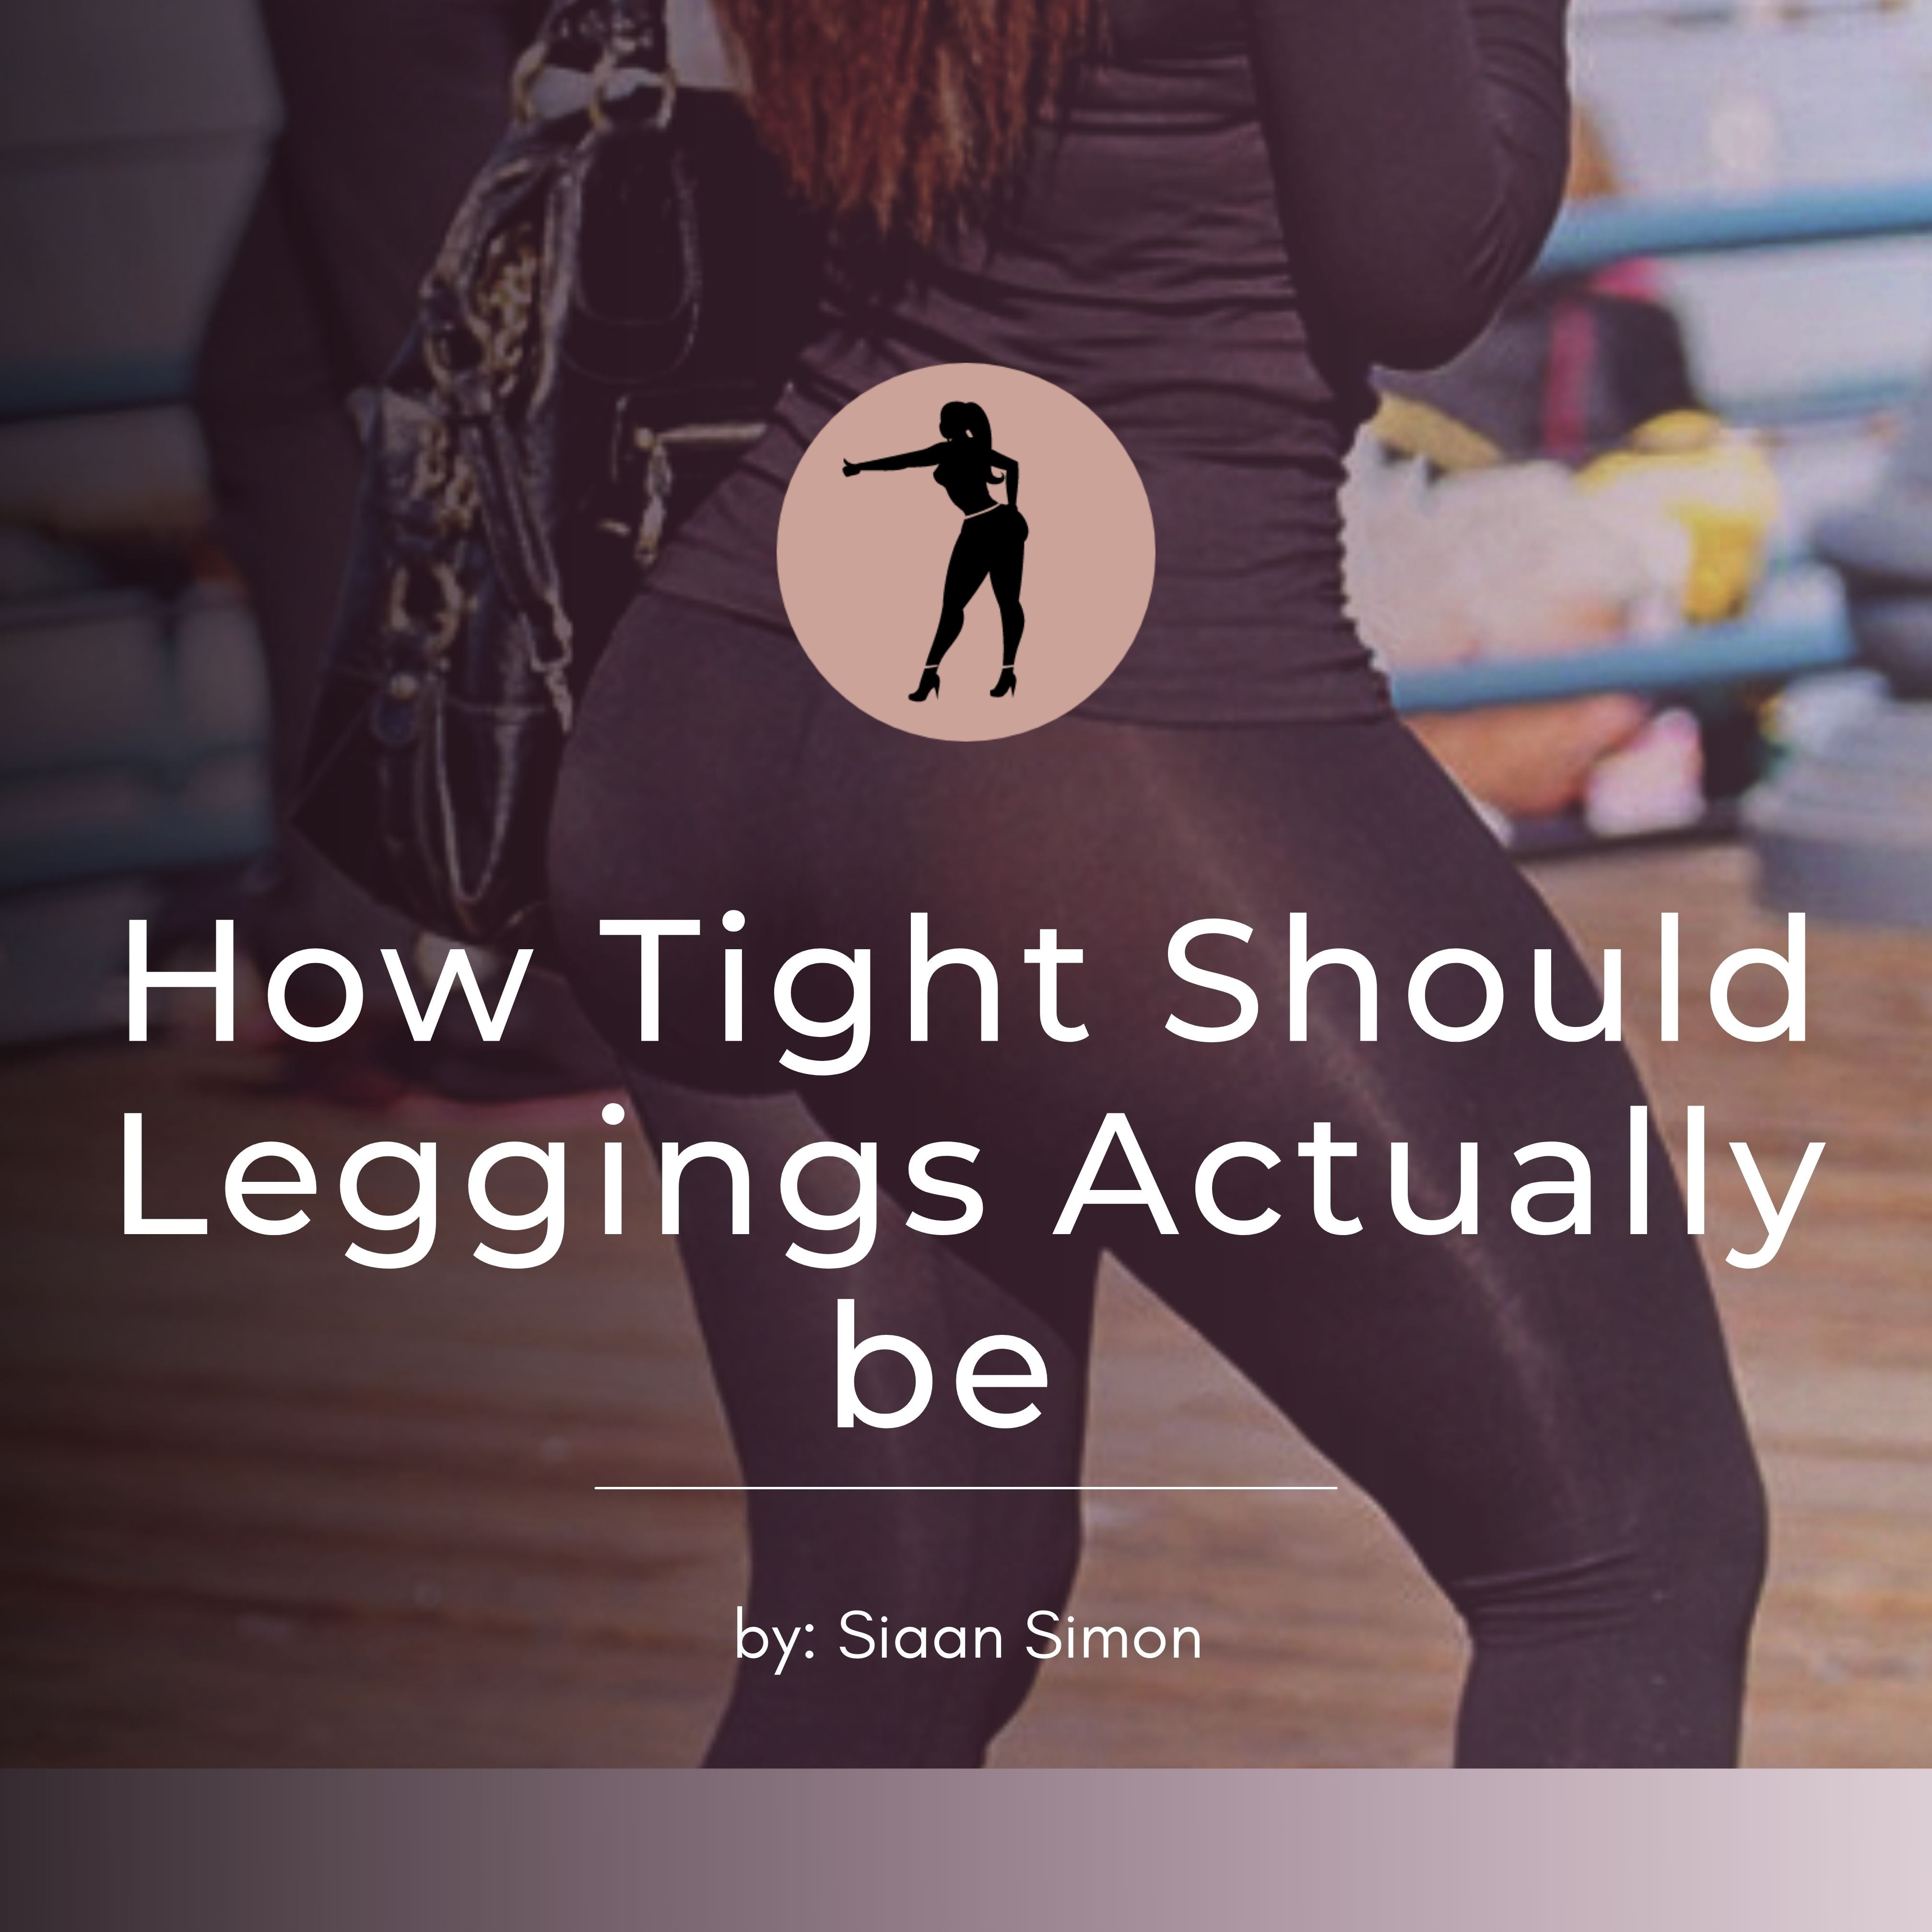 How Tight Should Legging Actually Be?